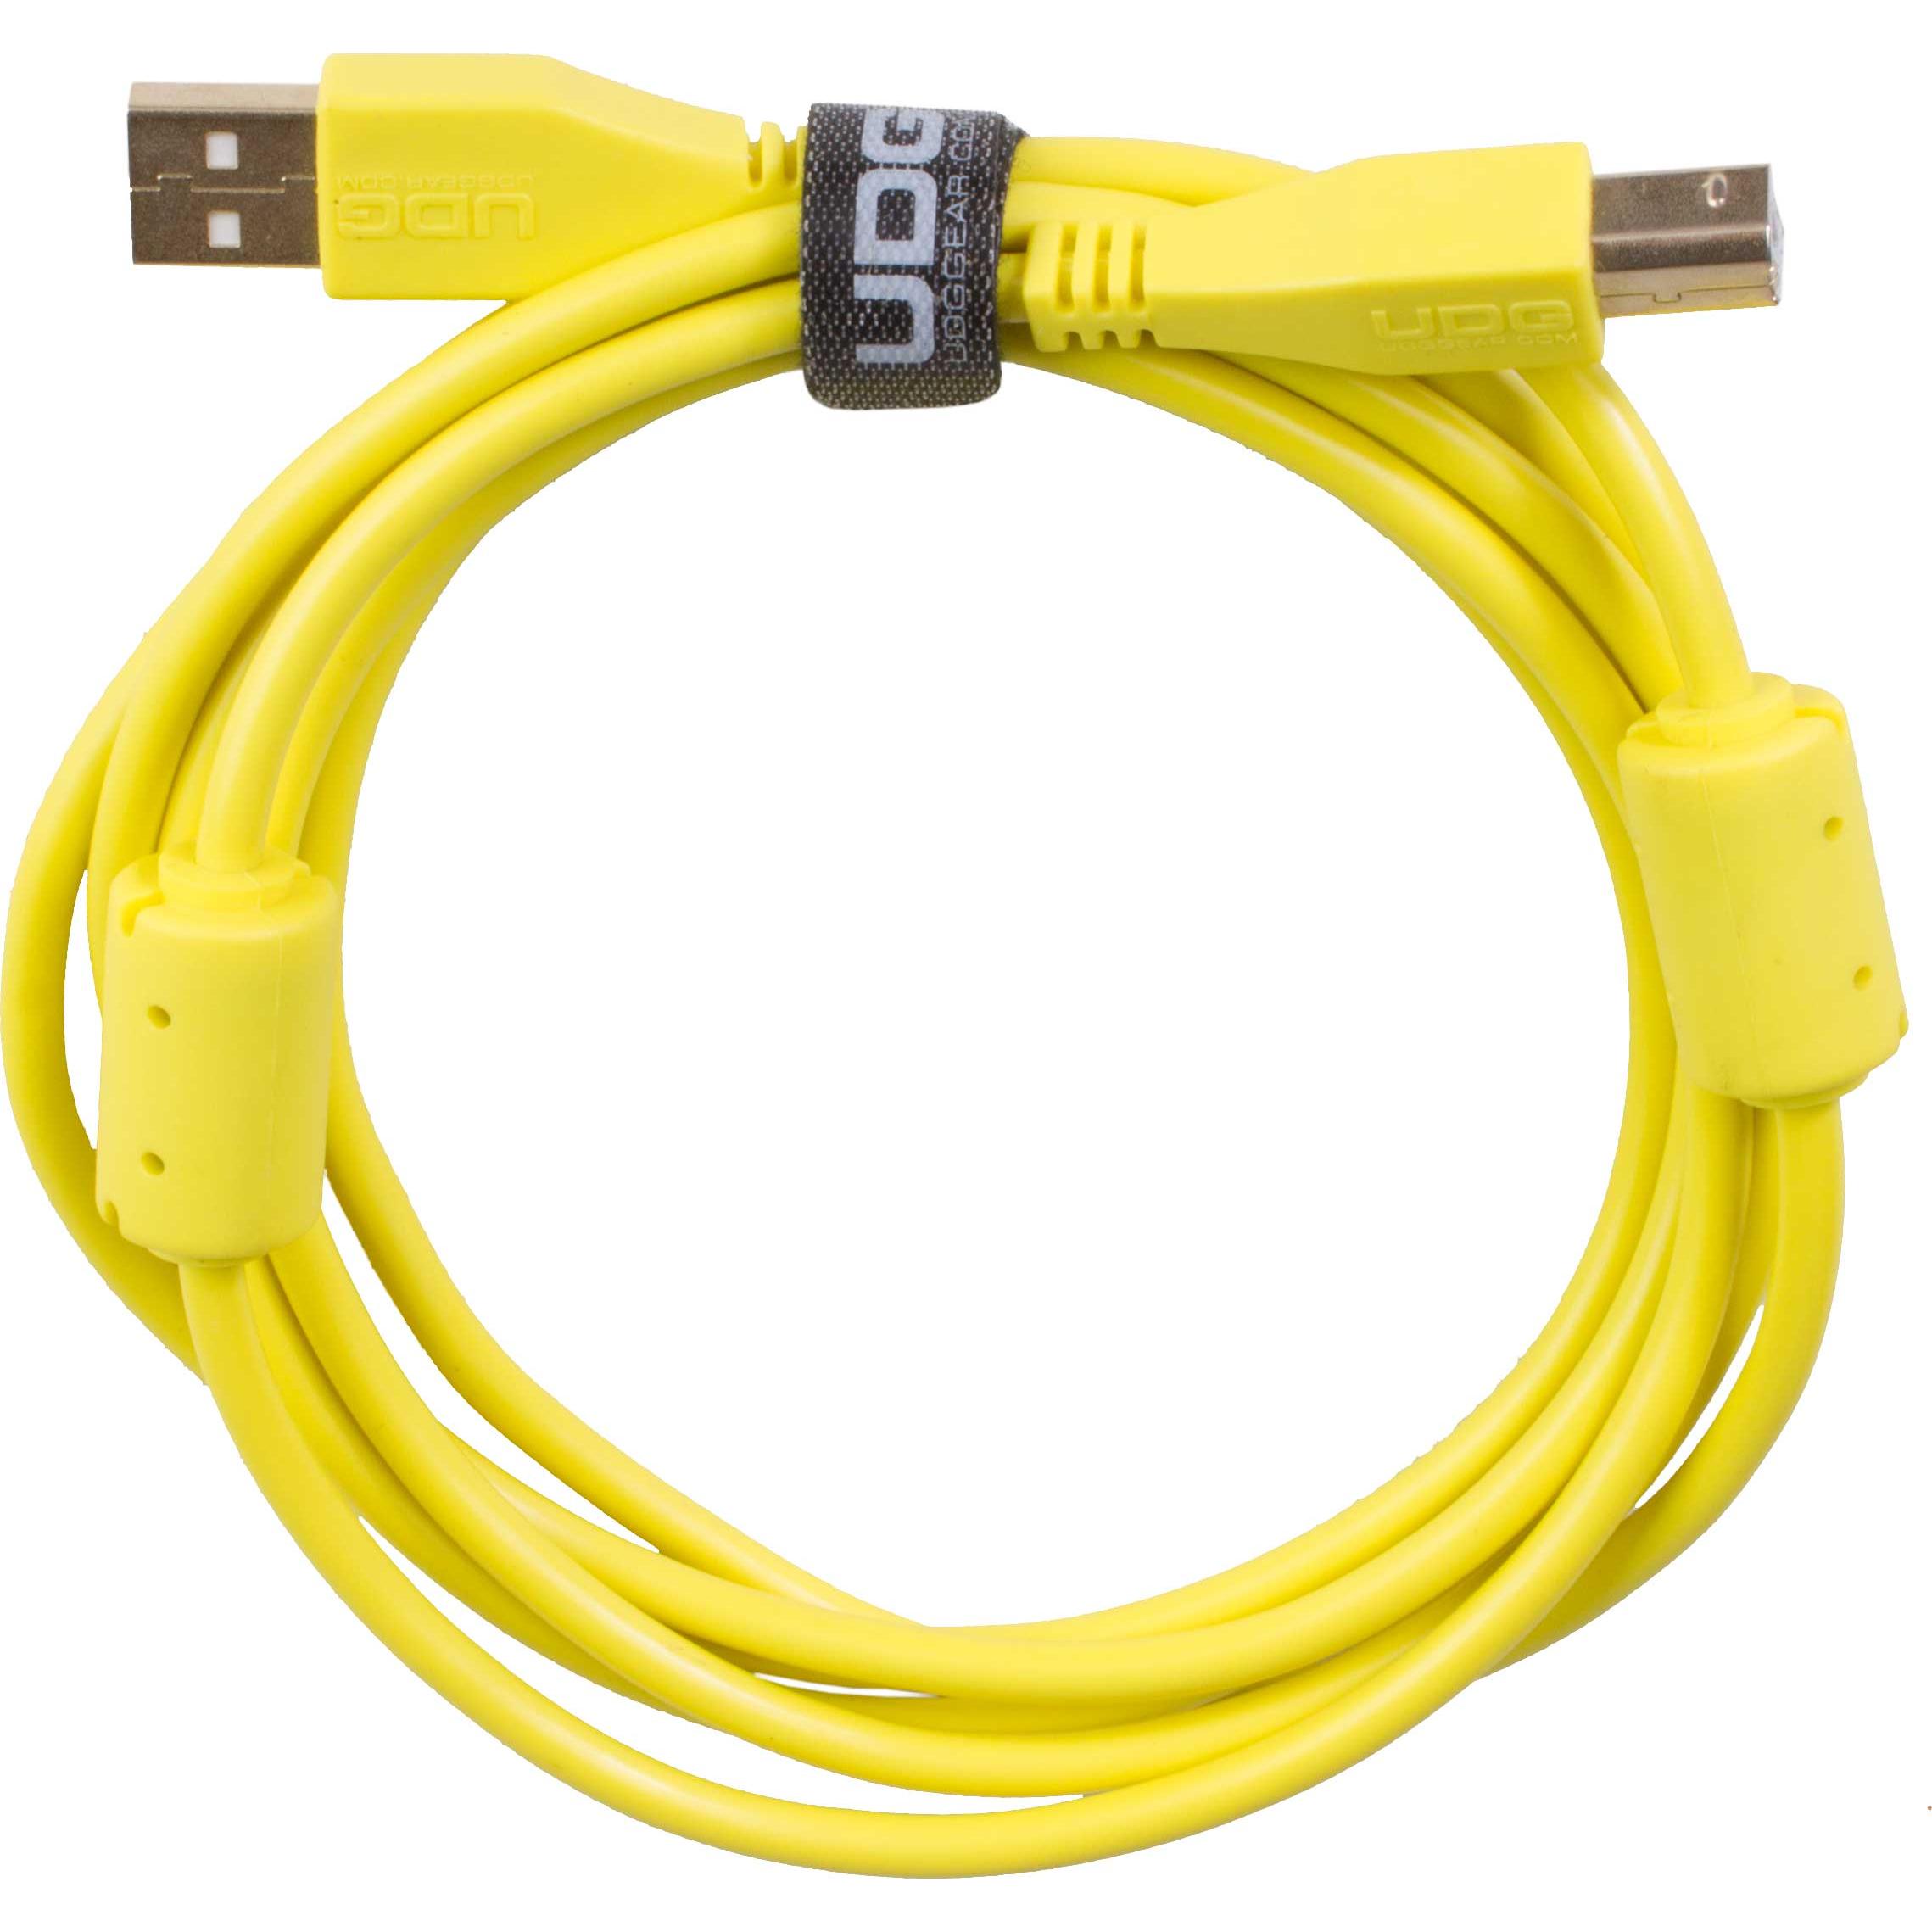 UDG U95002YL - ULTIMATE AUDIO CABLE USB 2.0 A-B YELLOW STRAIGHT 2M